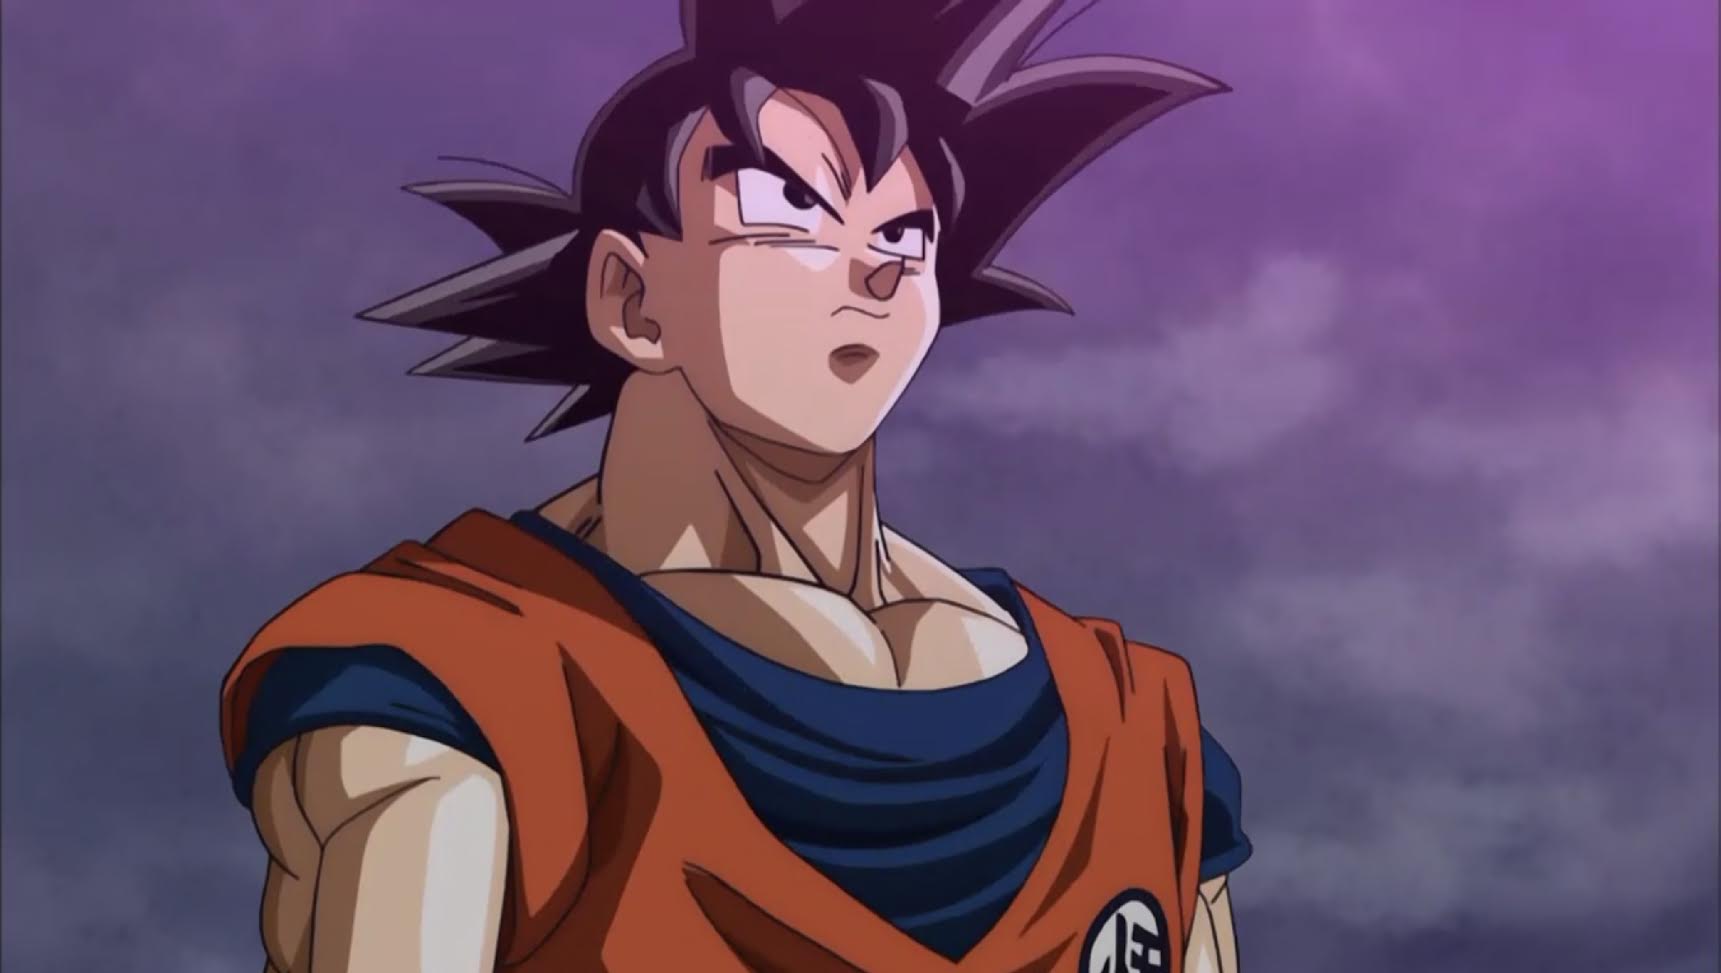 Dragon Ball Super: Episode 8 “Goku Makes an Entrance! A Last Chance from Lord Beerus?” Review